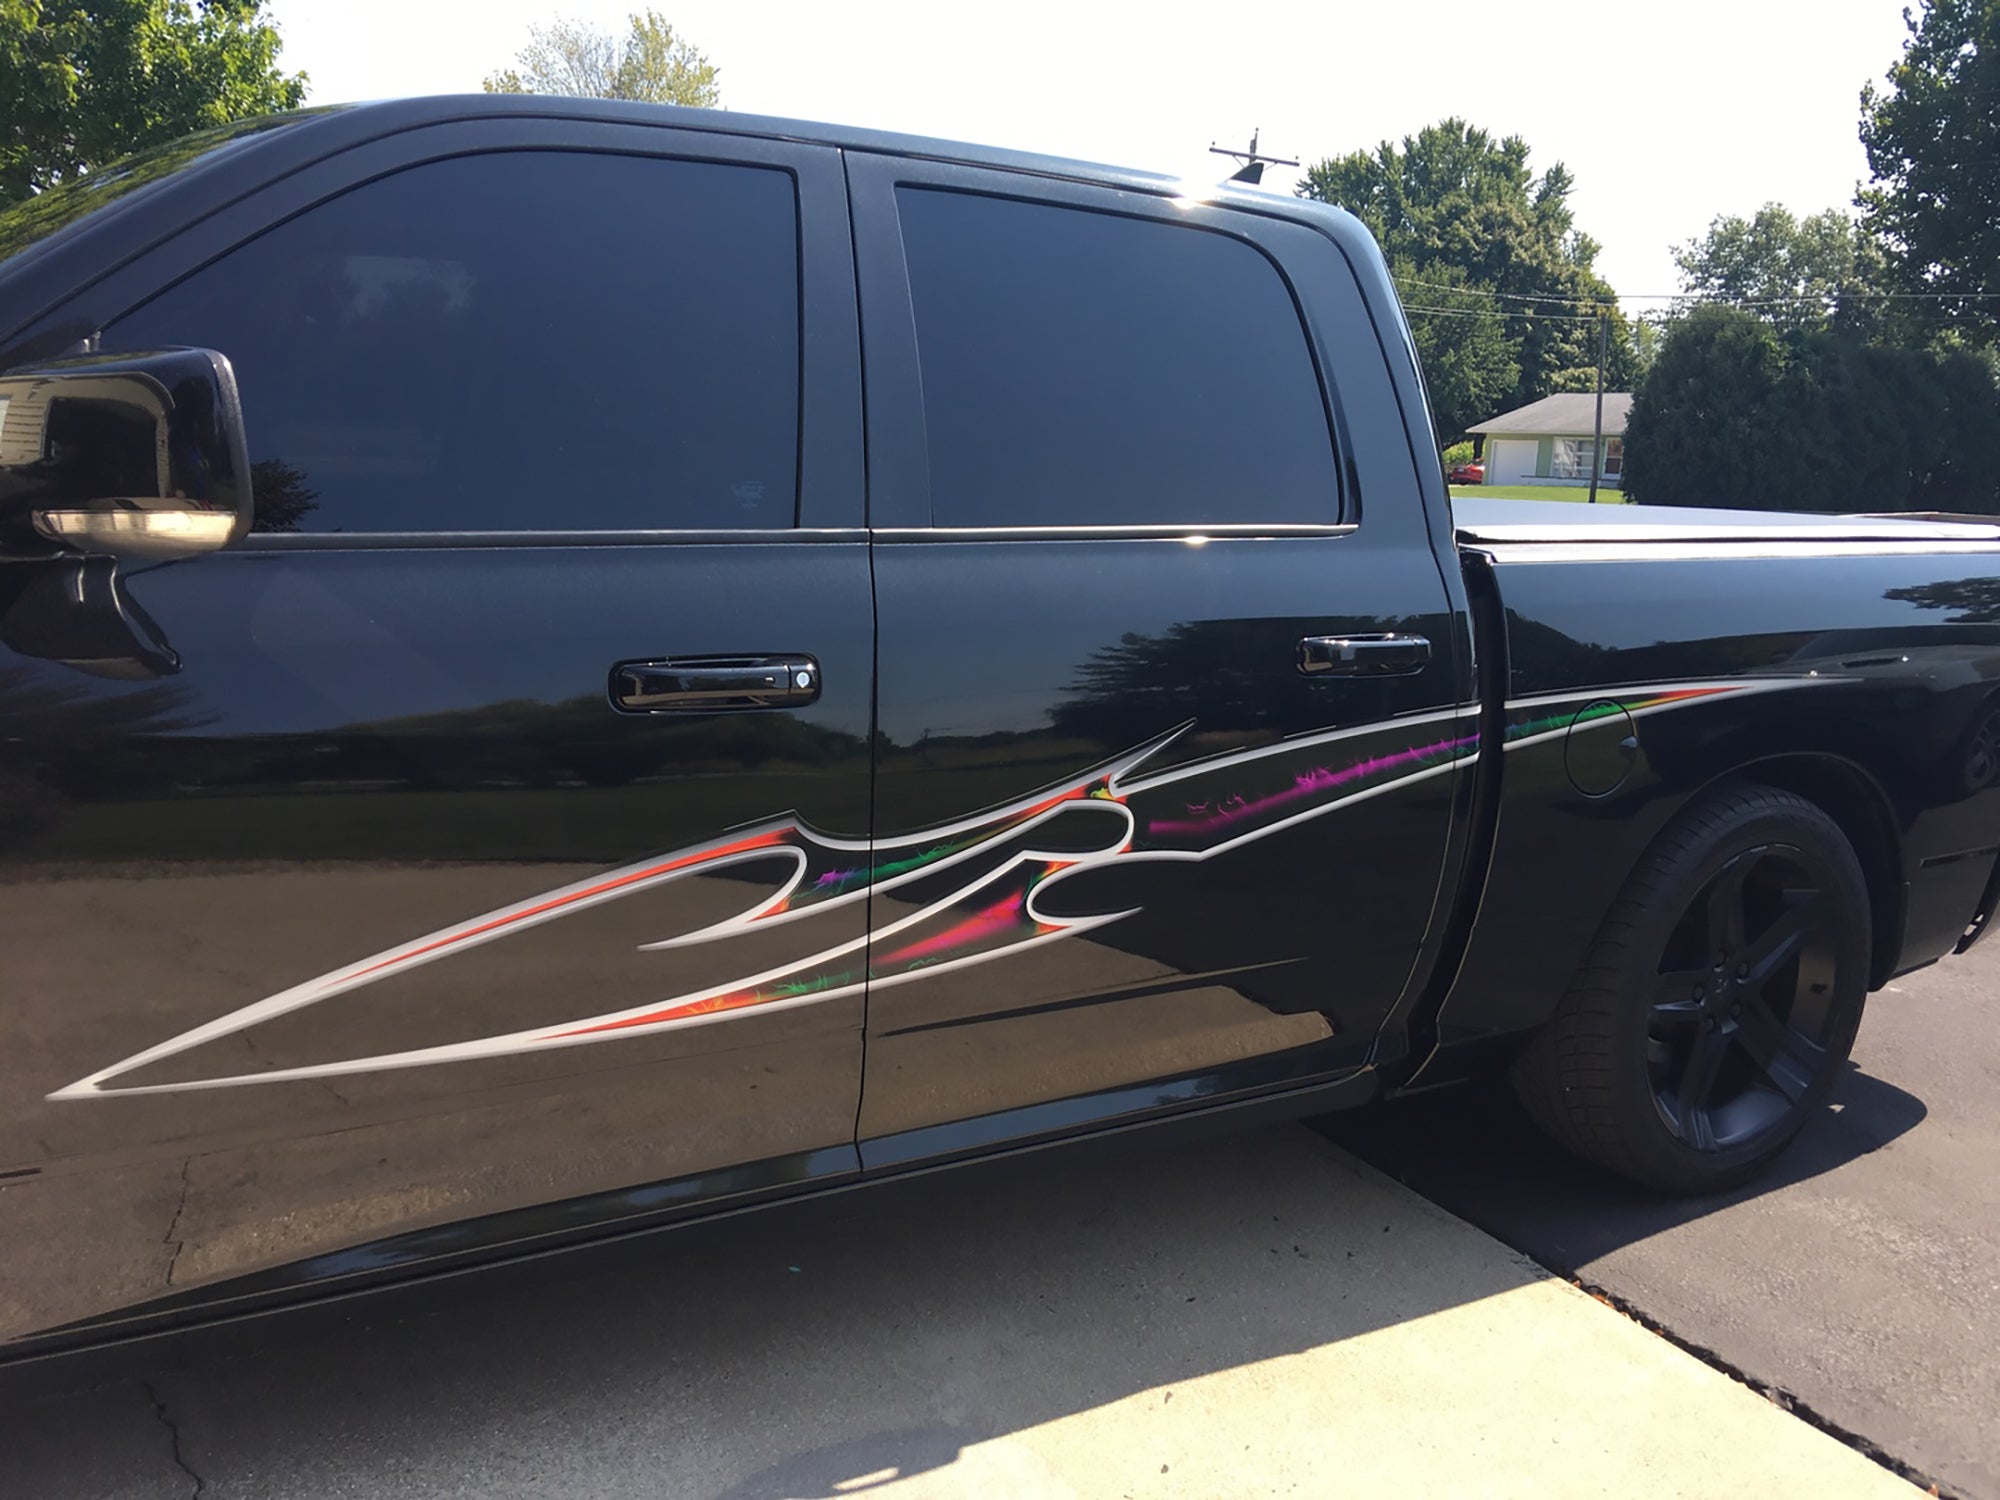 multi color blade stripe decal on the side of a black pickup truck